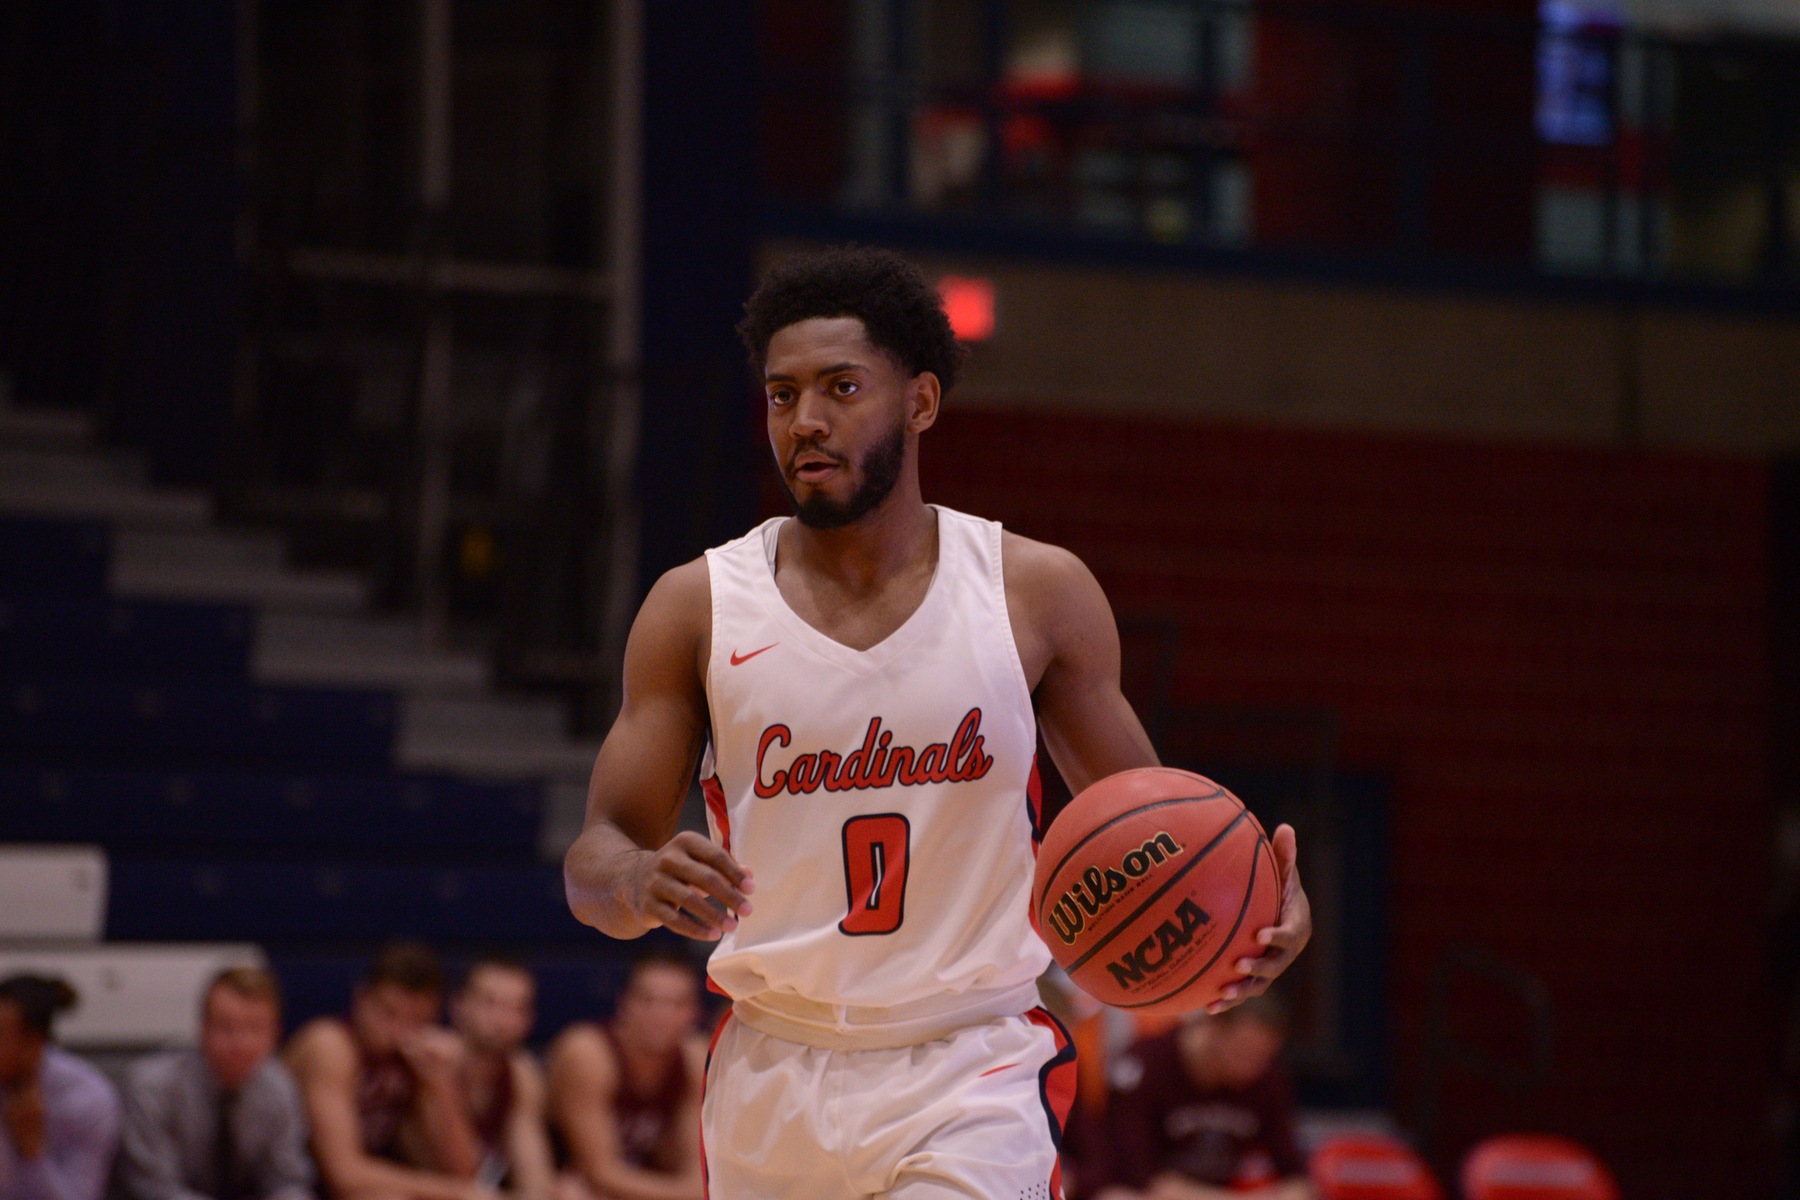 Cardinals close-out for 75-67 victory at Purdue Northwest